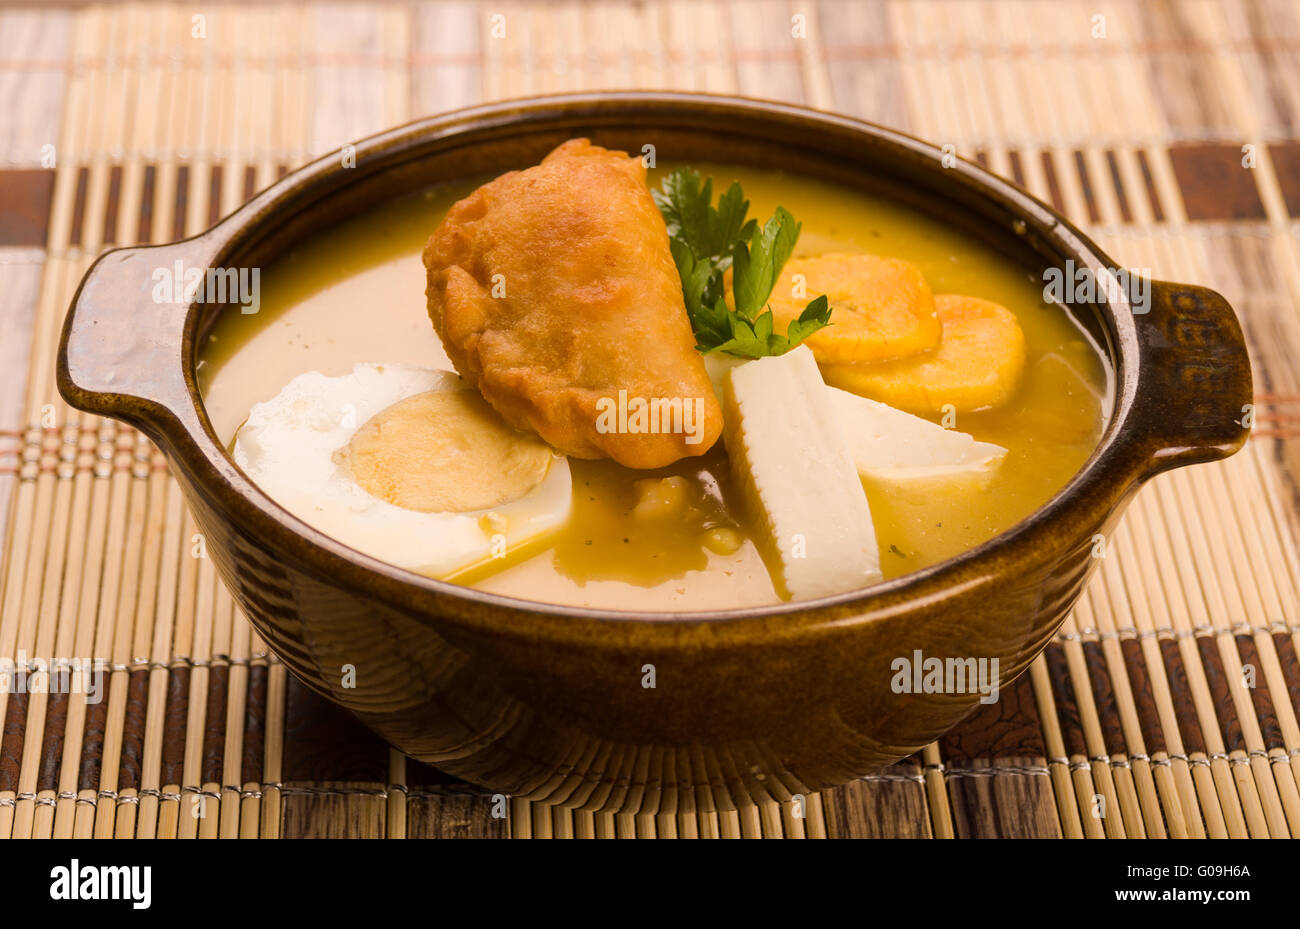 https://c8.alamy.com/comp/G09H6A/elegant-table-setting-with-full-serving-of-traditional-fanesca-soup-G09H6A.jpg